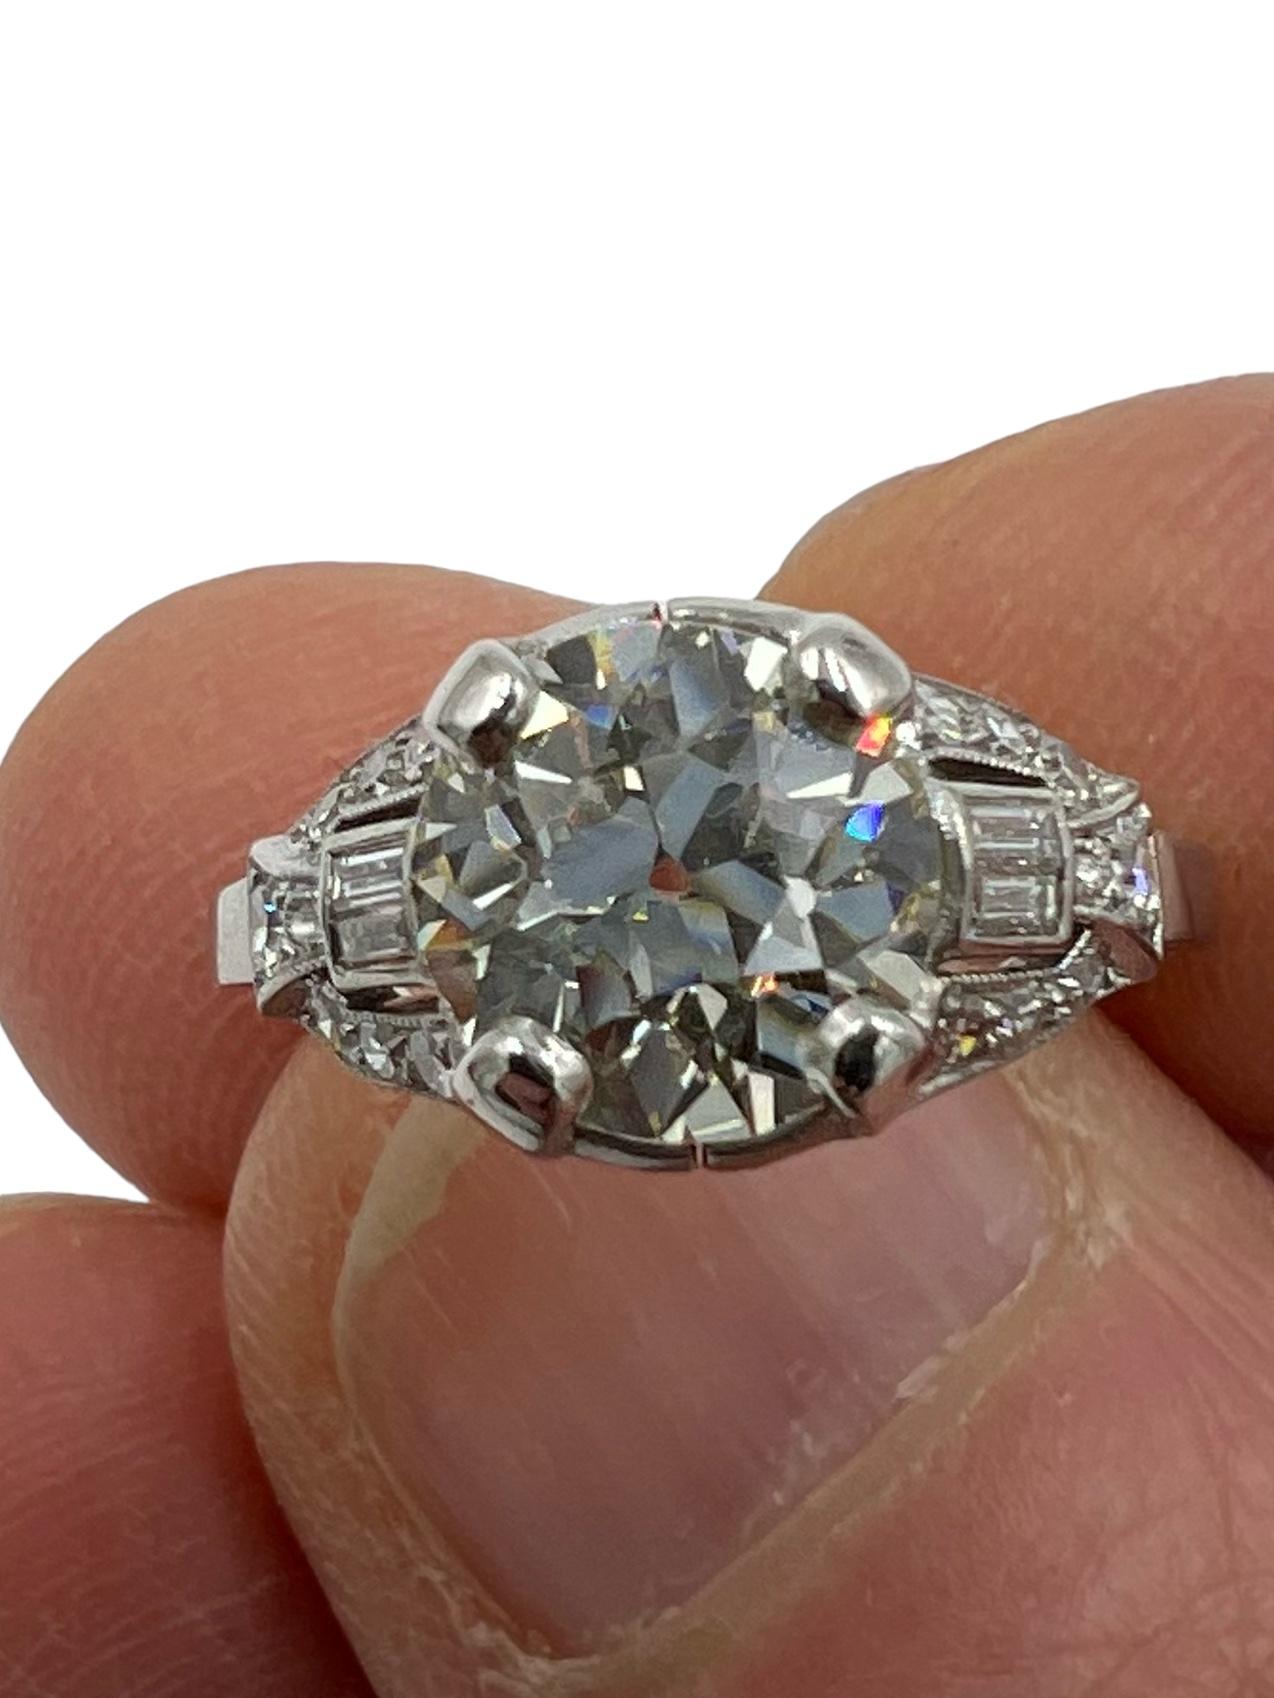 Art Deco 2.20 carat old European cut diamond platinum engagement ring, circa 1930s.

 Are you looking for a truly unique and stunning engagement ring that will stand the test of time? Look no further than this Art Deco 2.20 Carat Old European Cut